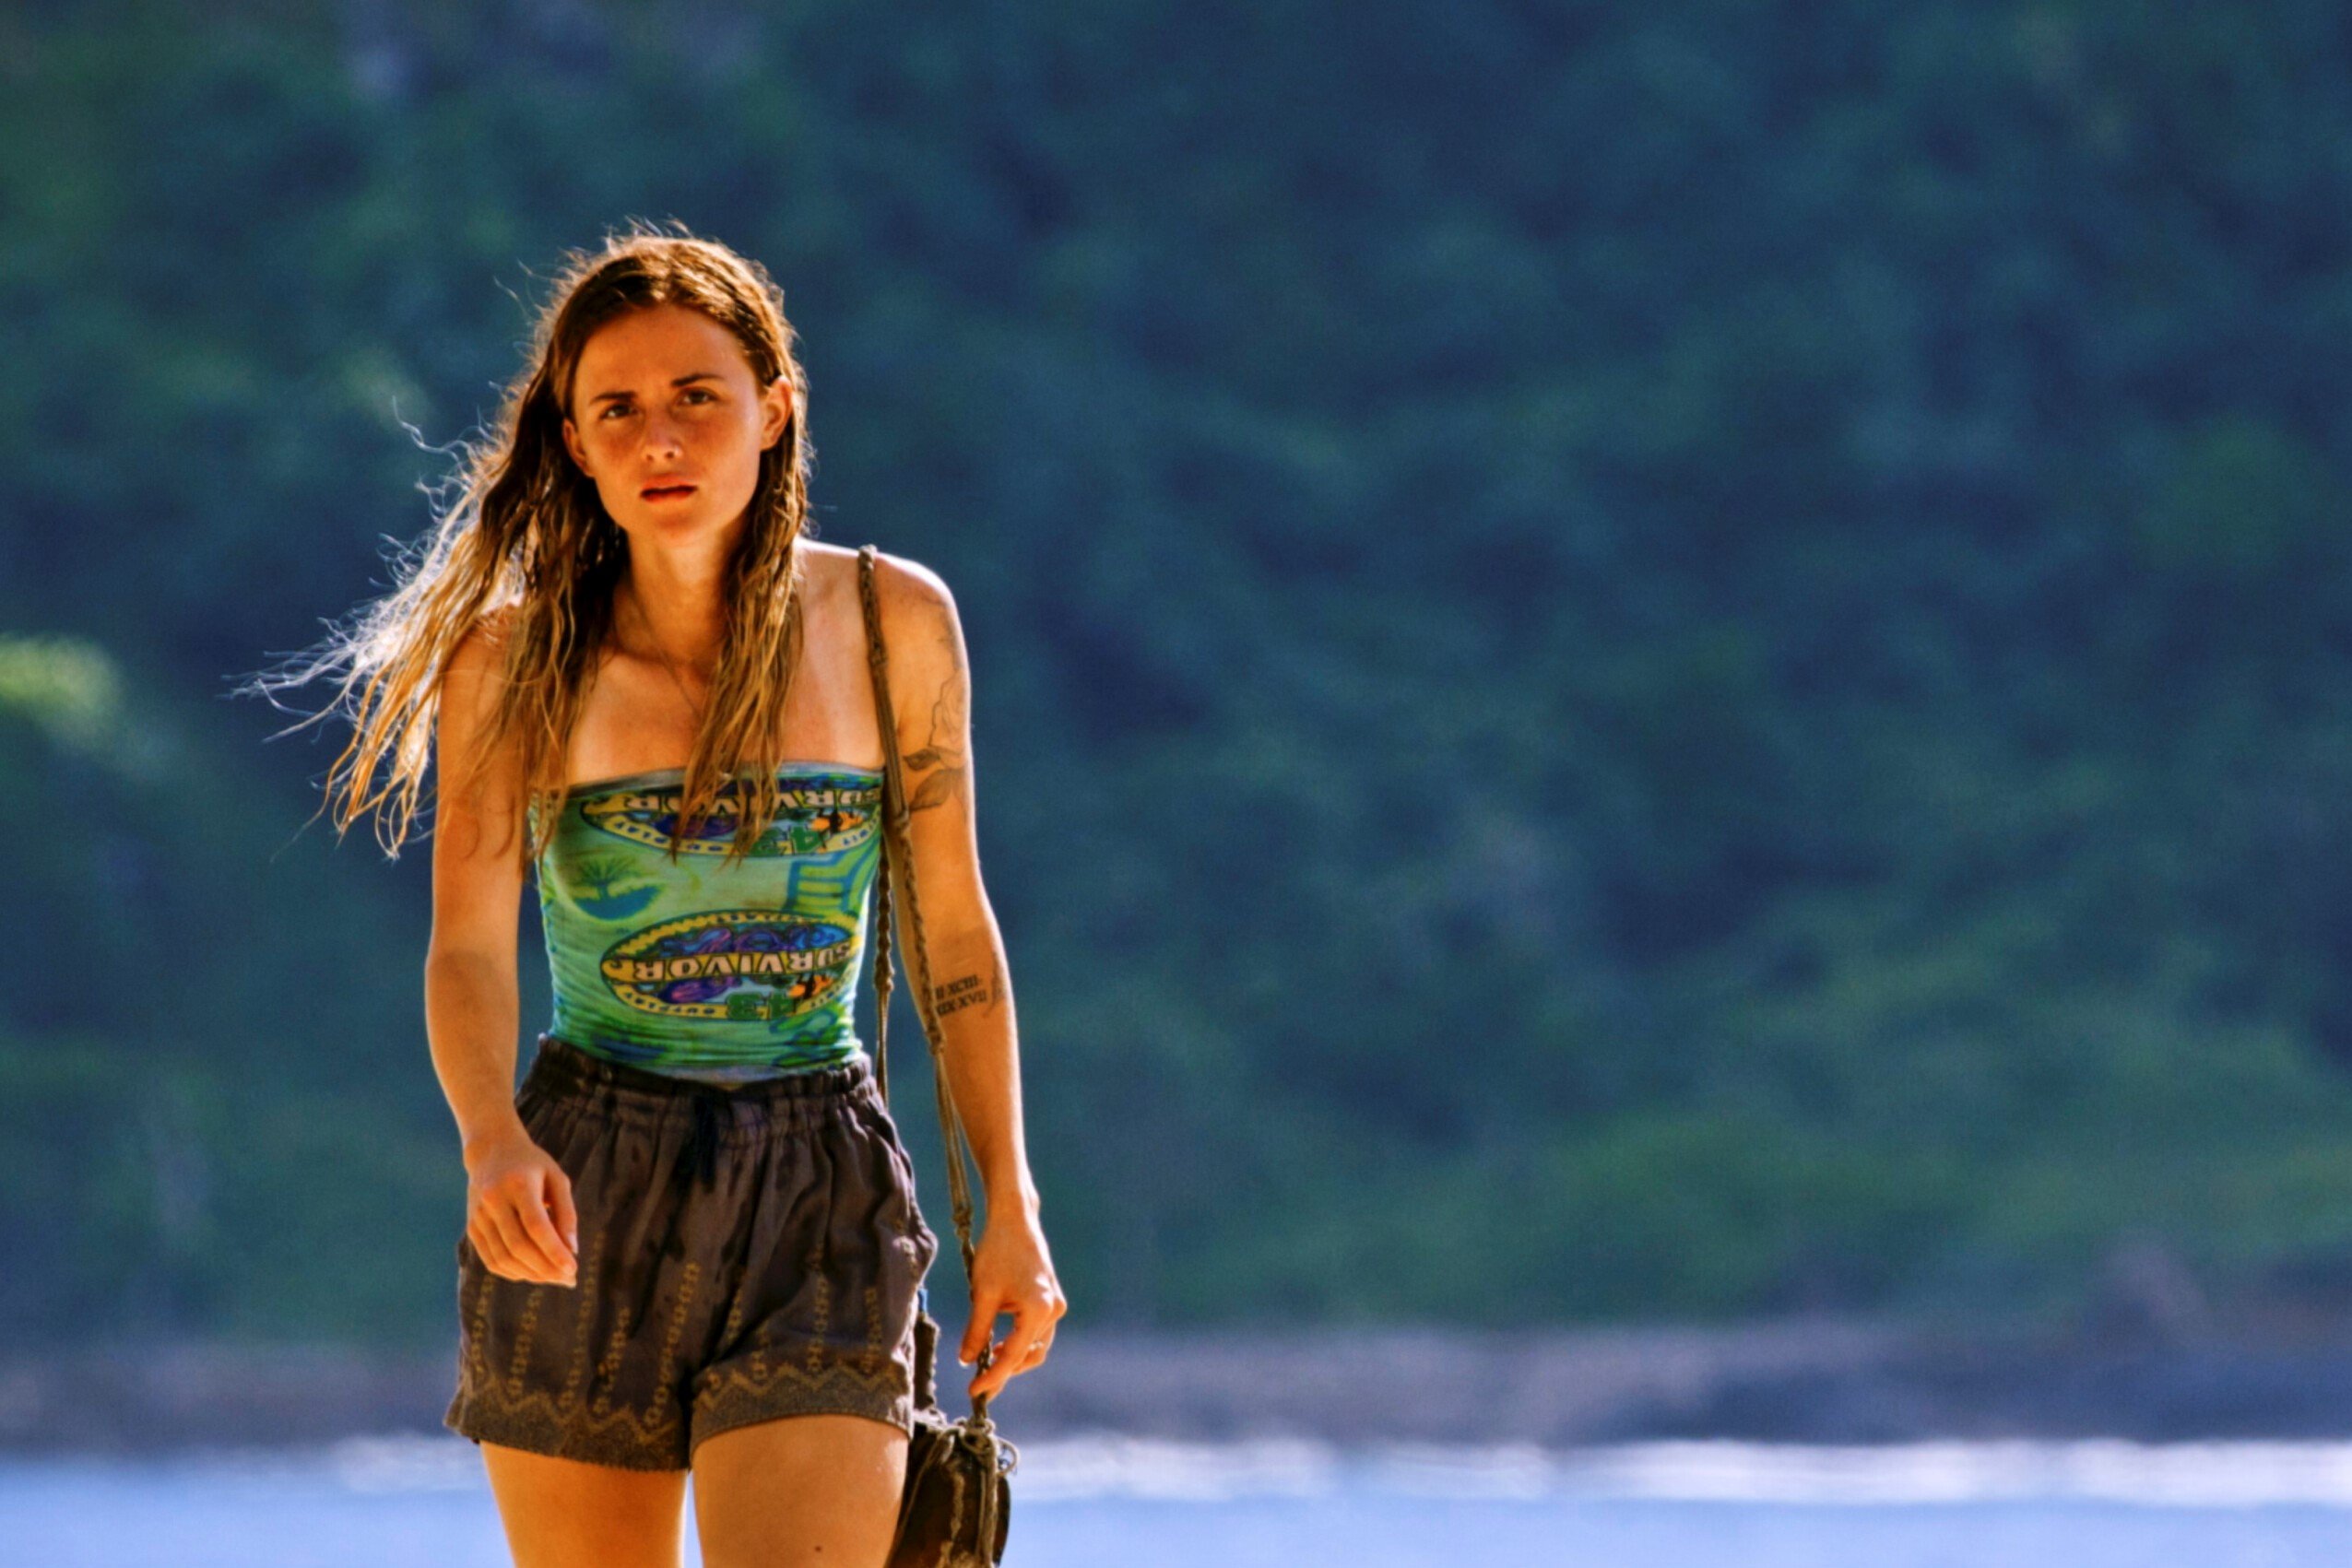 Cassidy Clark, who according to some spoilers, might win 'Survivor' Season 43, wears her light blue 'Survivor' buff as a top and dark gray shorts.